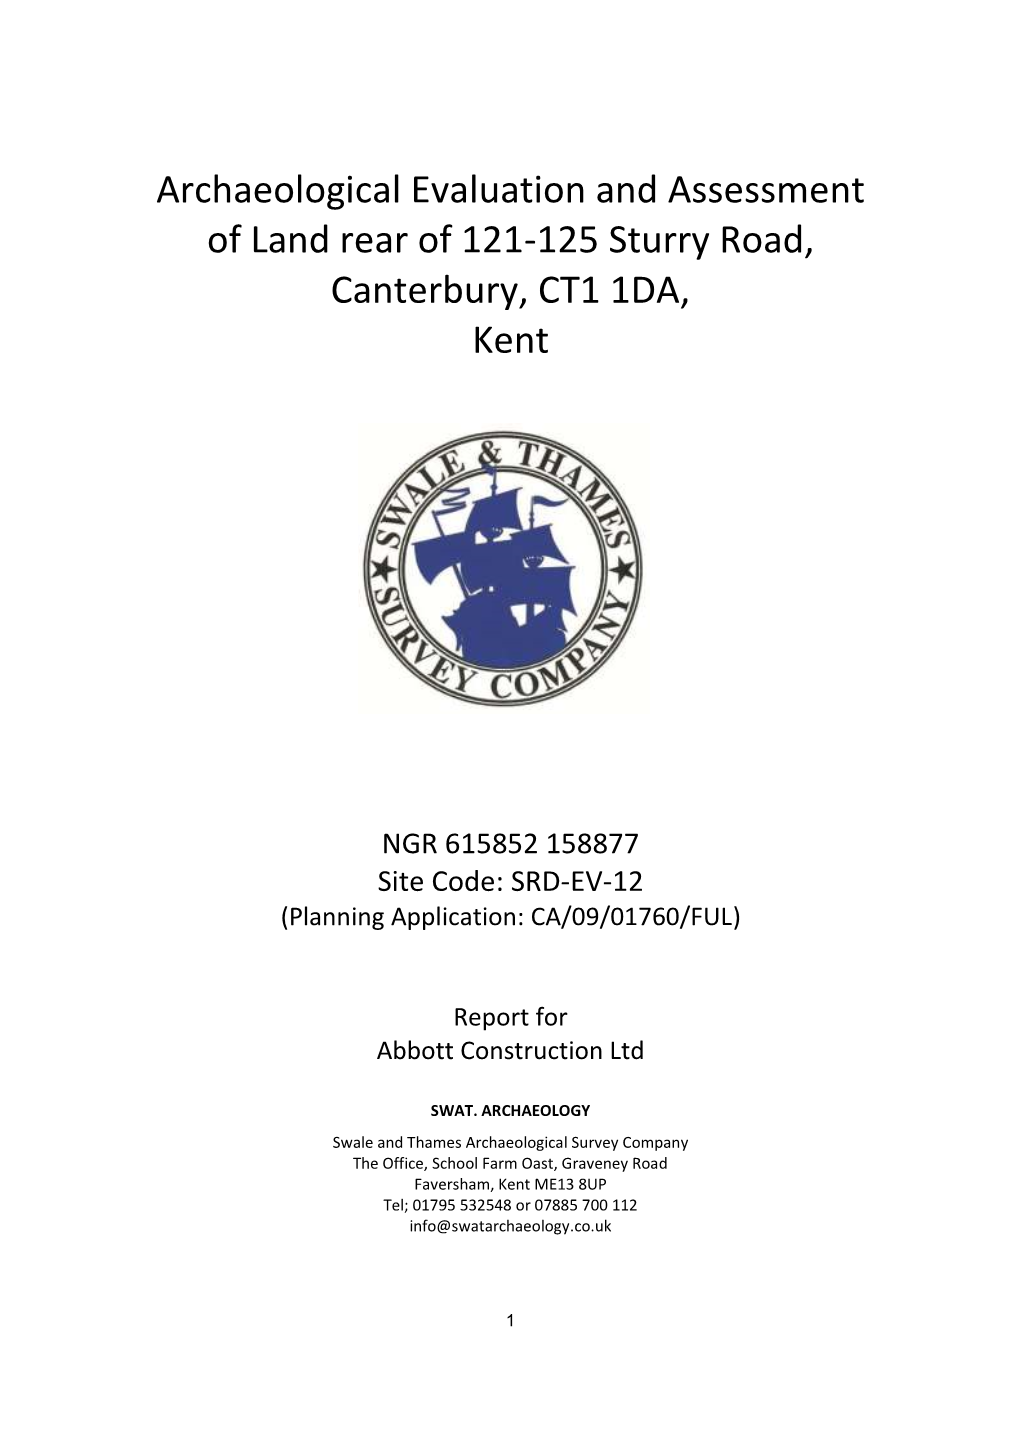 SWAT-35. Sturry Rd Complete.Pdf